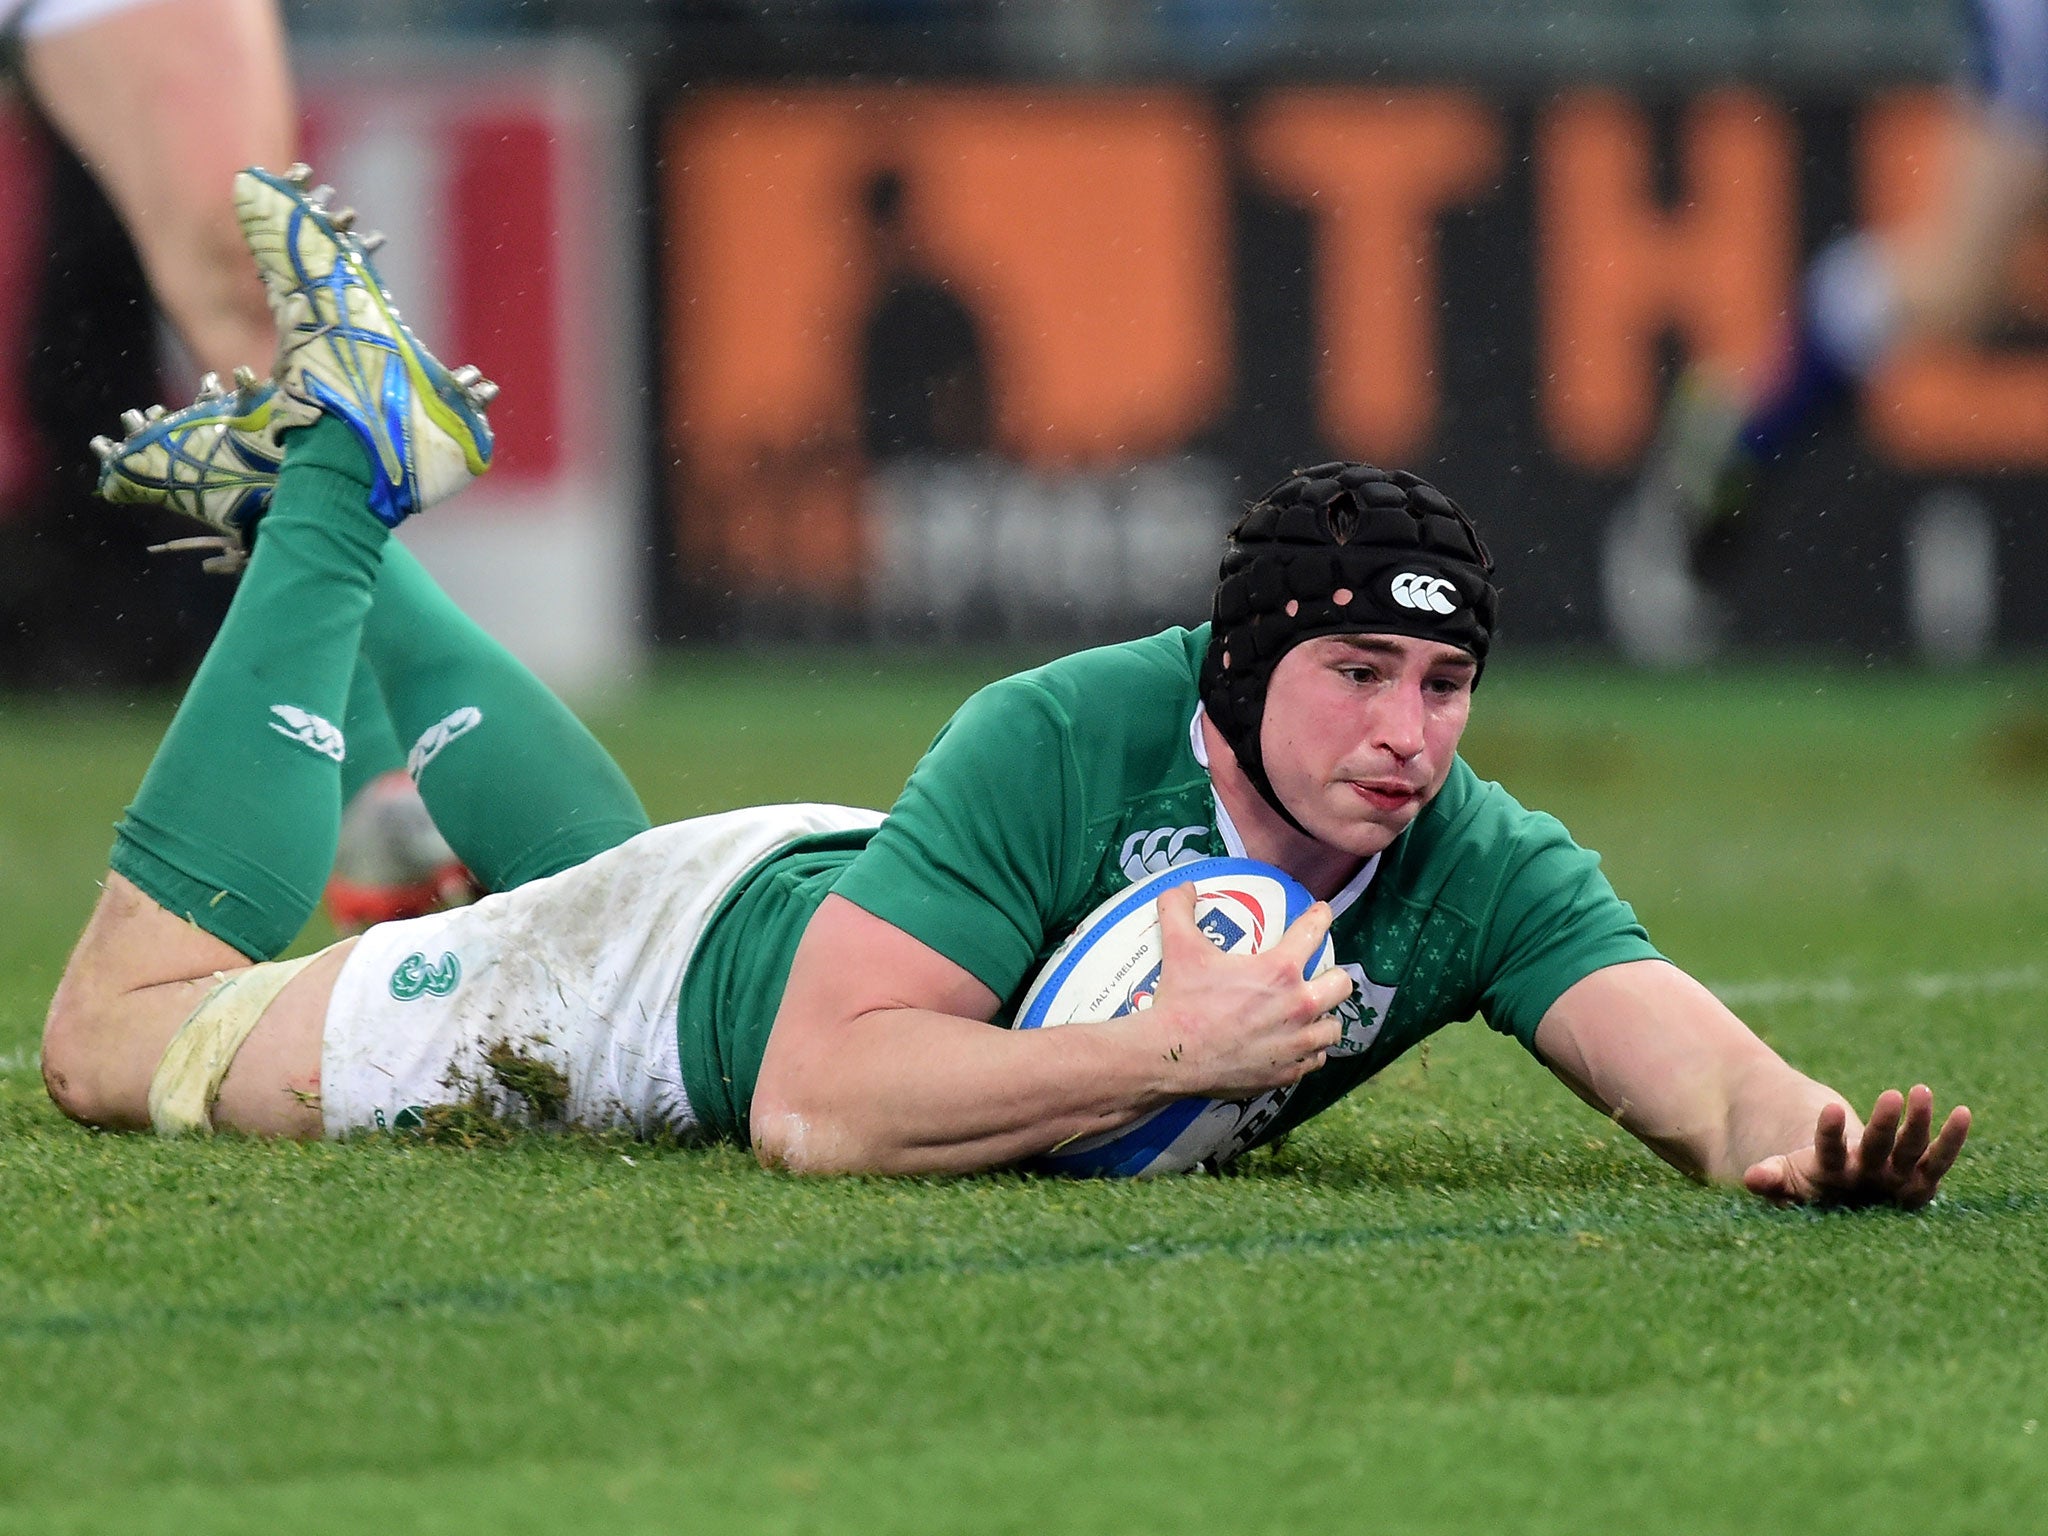 Tommy O'Donnell slides in to score a try after running 40m